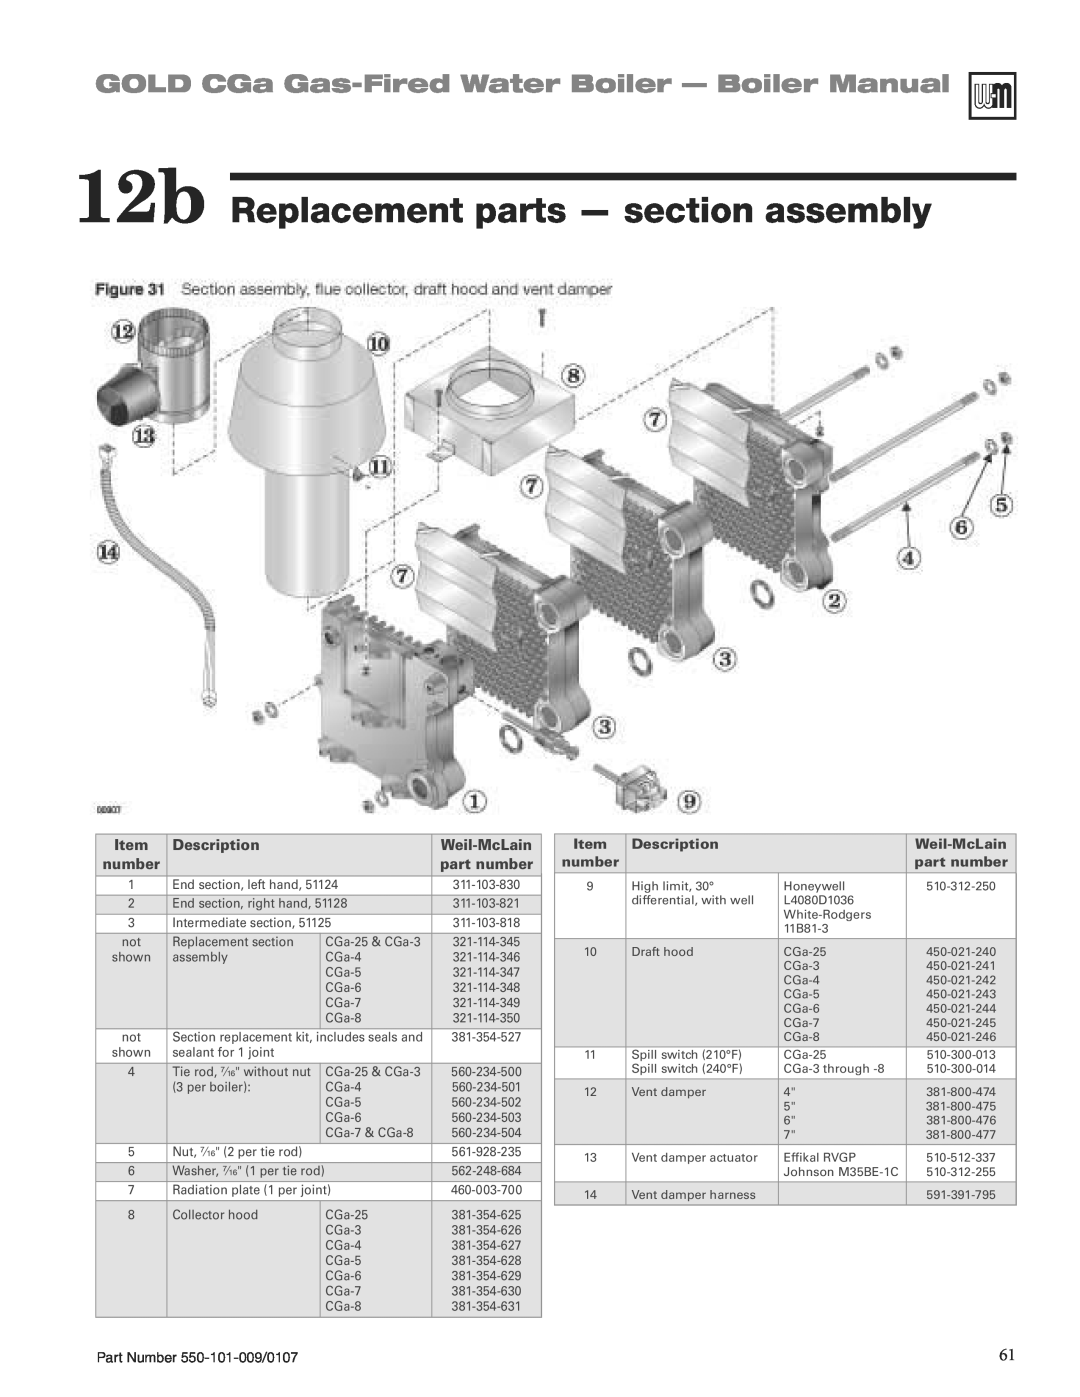 Weil-McLain CGA25SPDN 12b Replacement parts - section assembly, GOLD CGa Gas-FiredWater Boiler - Boiler Manual, number 